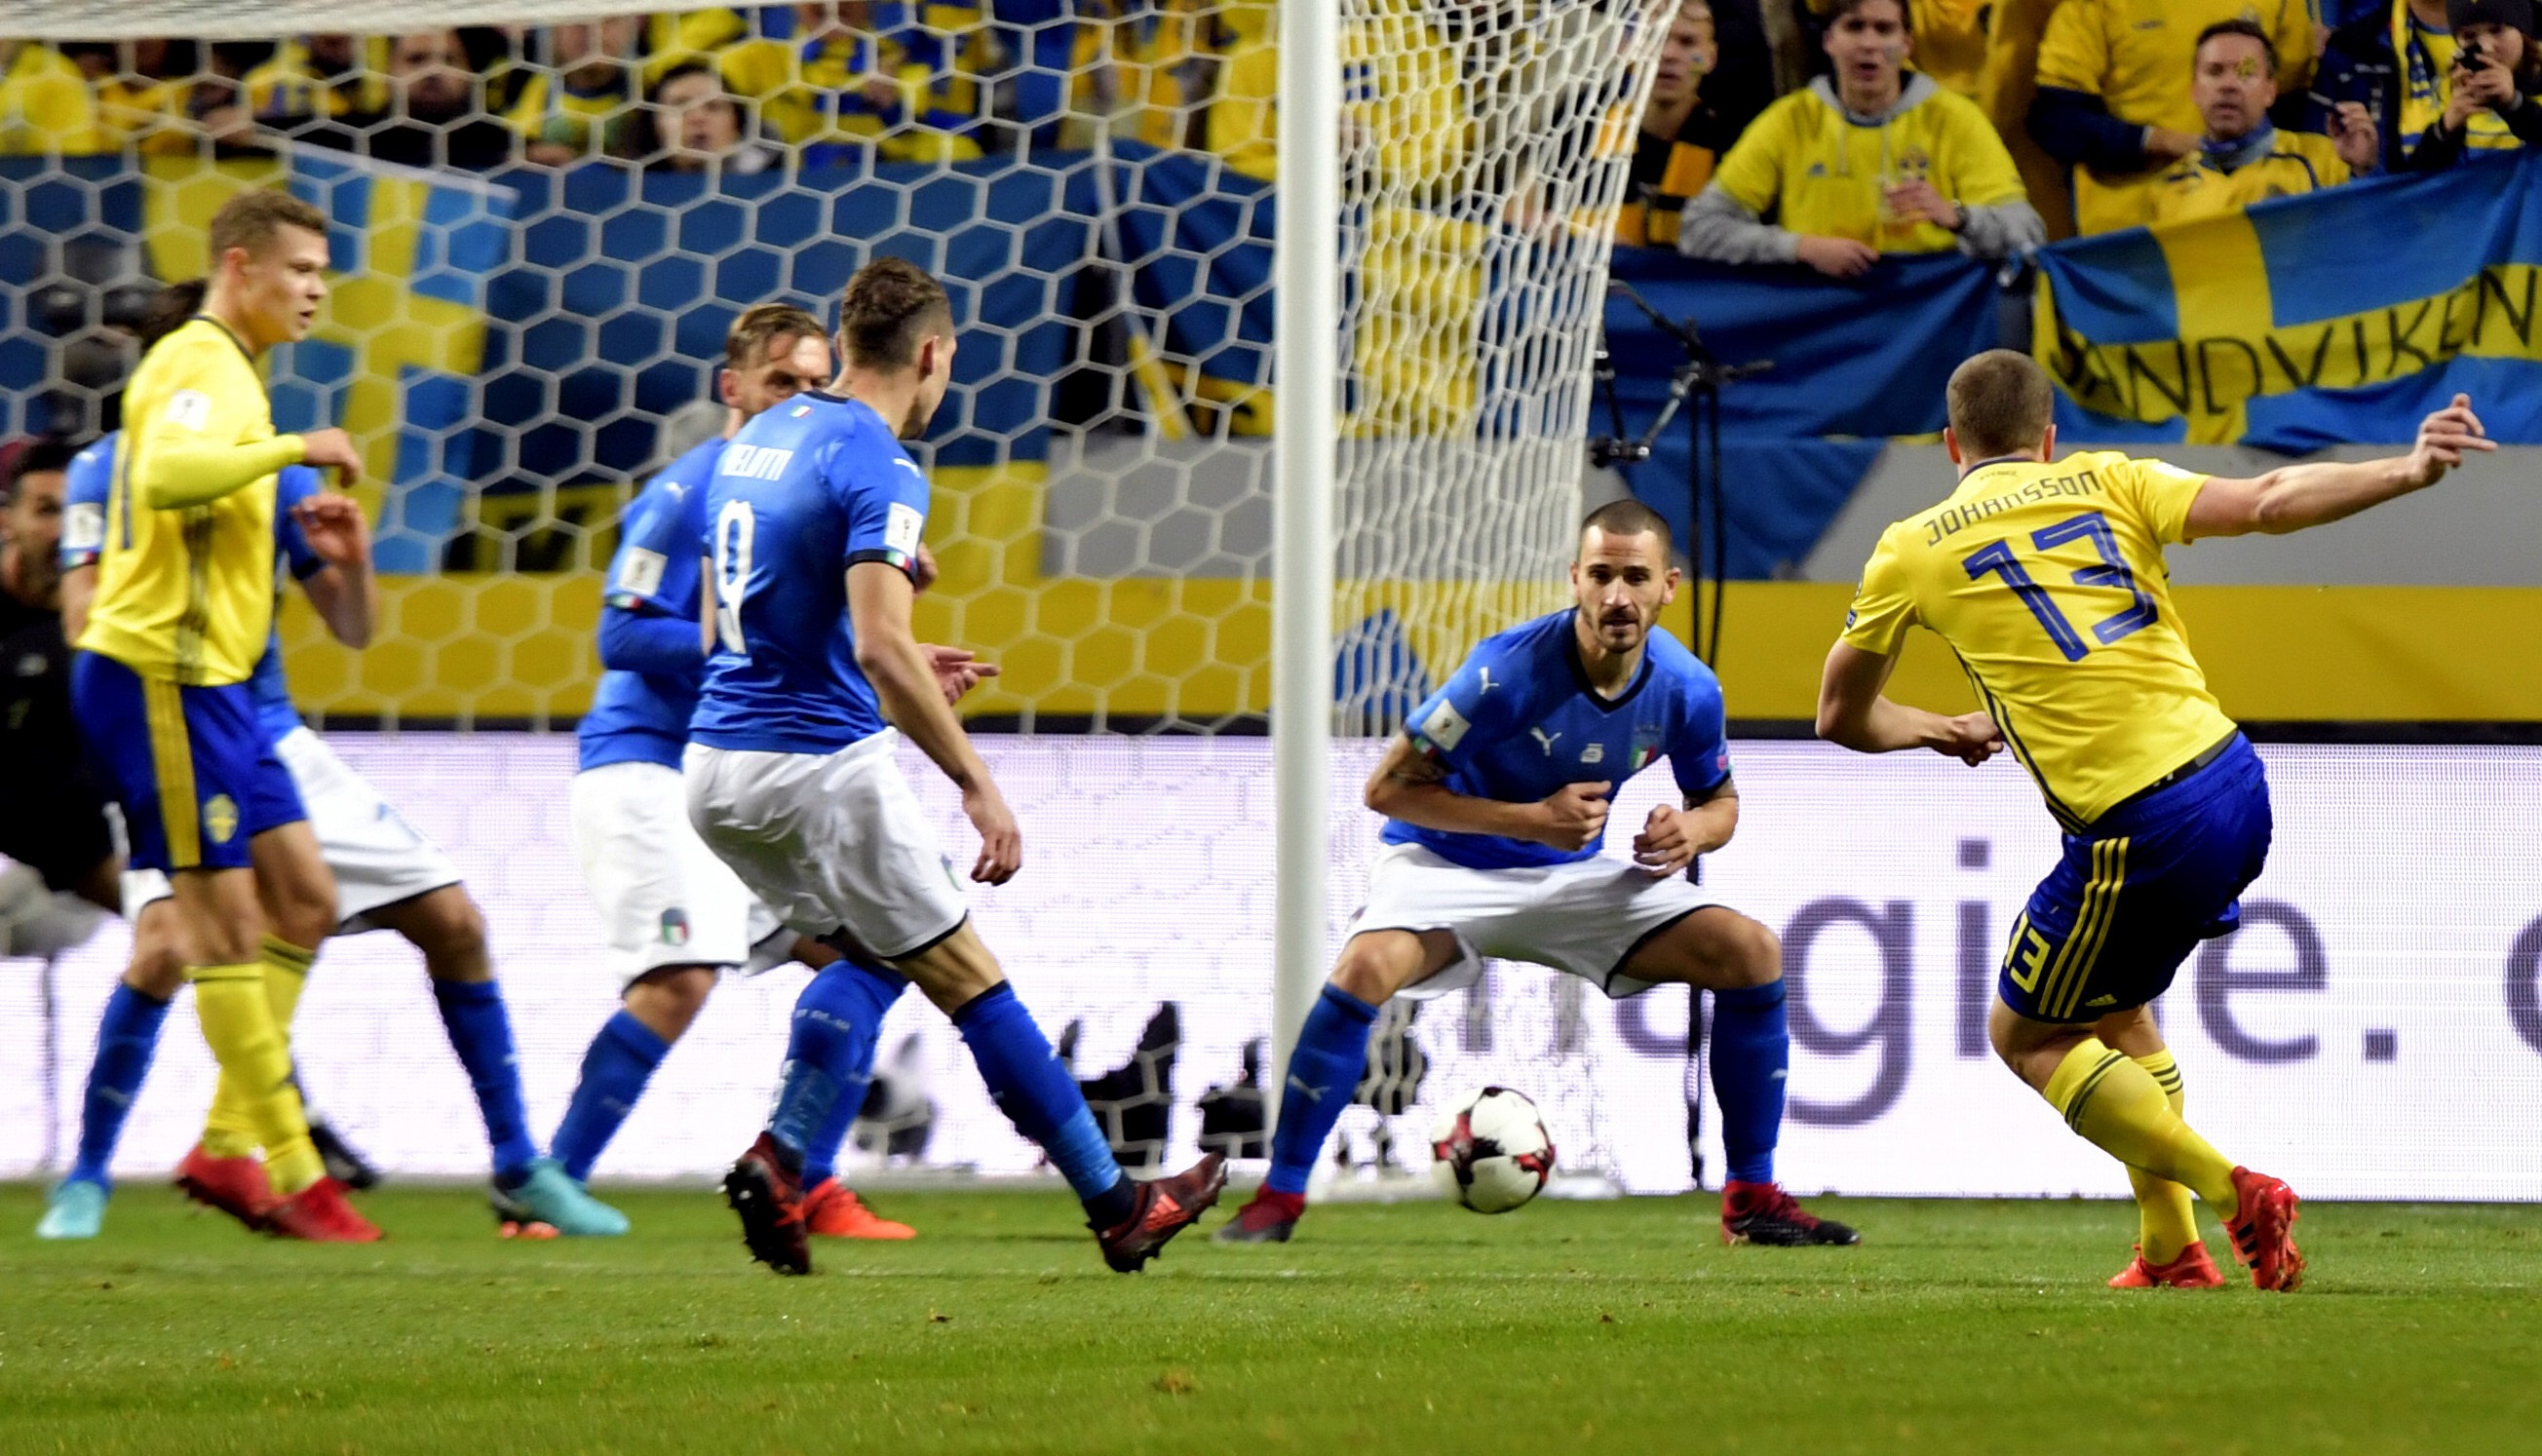 Sweden substitute Jakob Johansson scores the only goal of the match during the World Cup qualifying play-off first leg match against Italy in Stockholm. Photo: AP